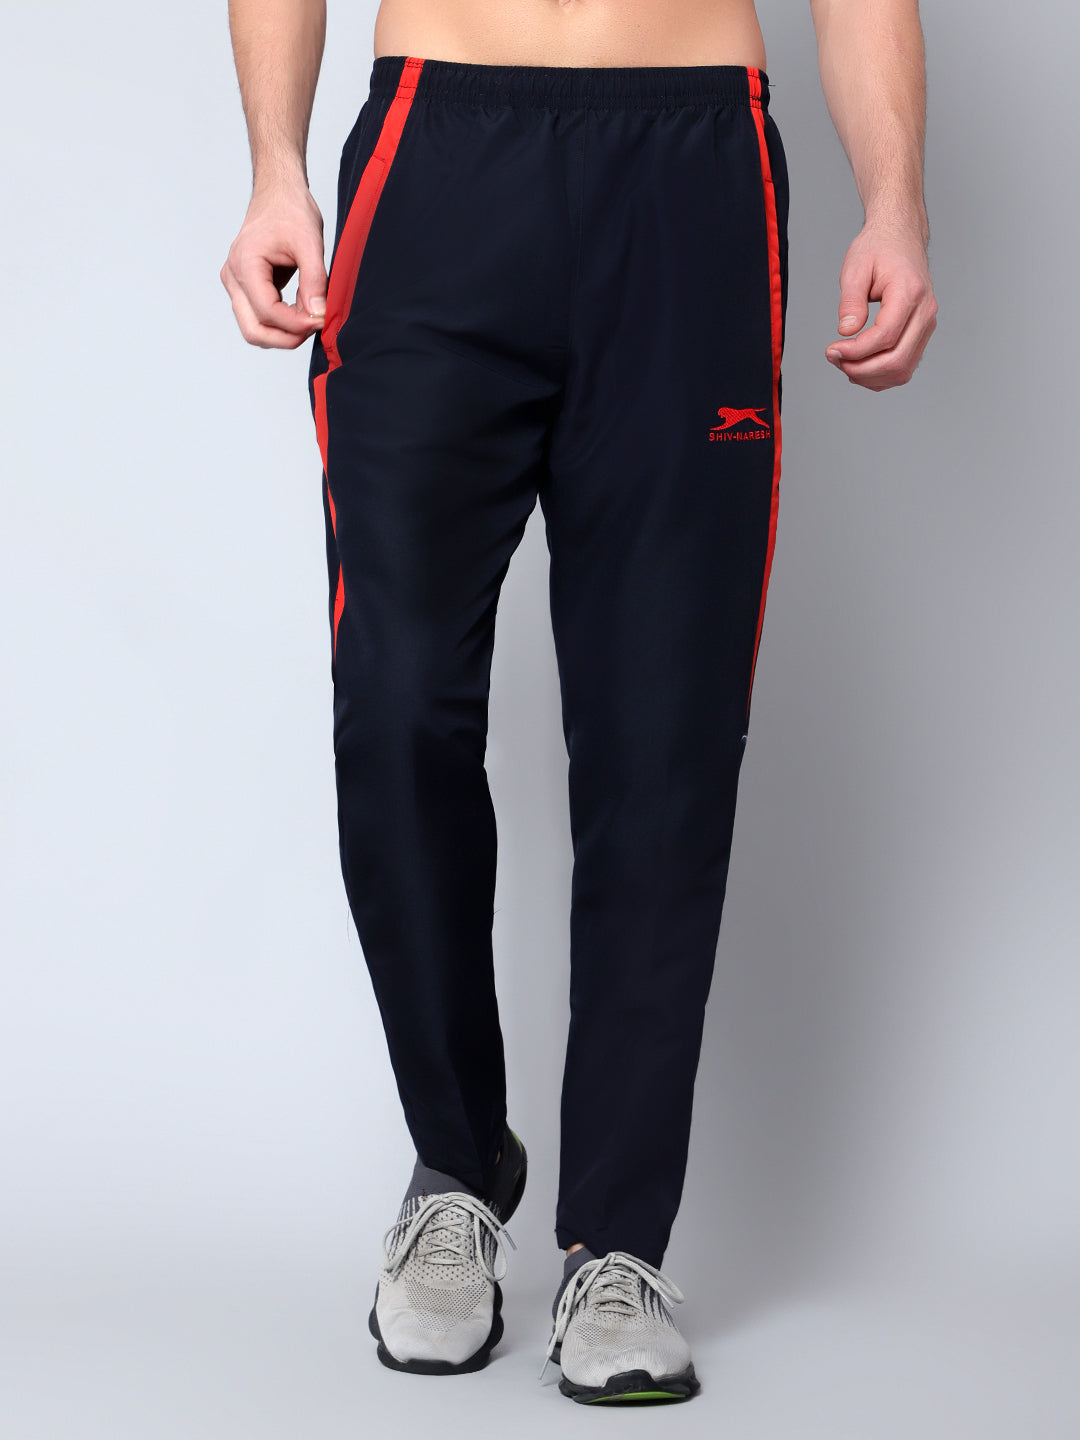 Men's Track Pant Lower Low Price Best Quality Cotton Track Pants with Side  Pockets Color Blue (